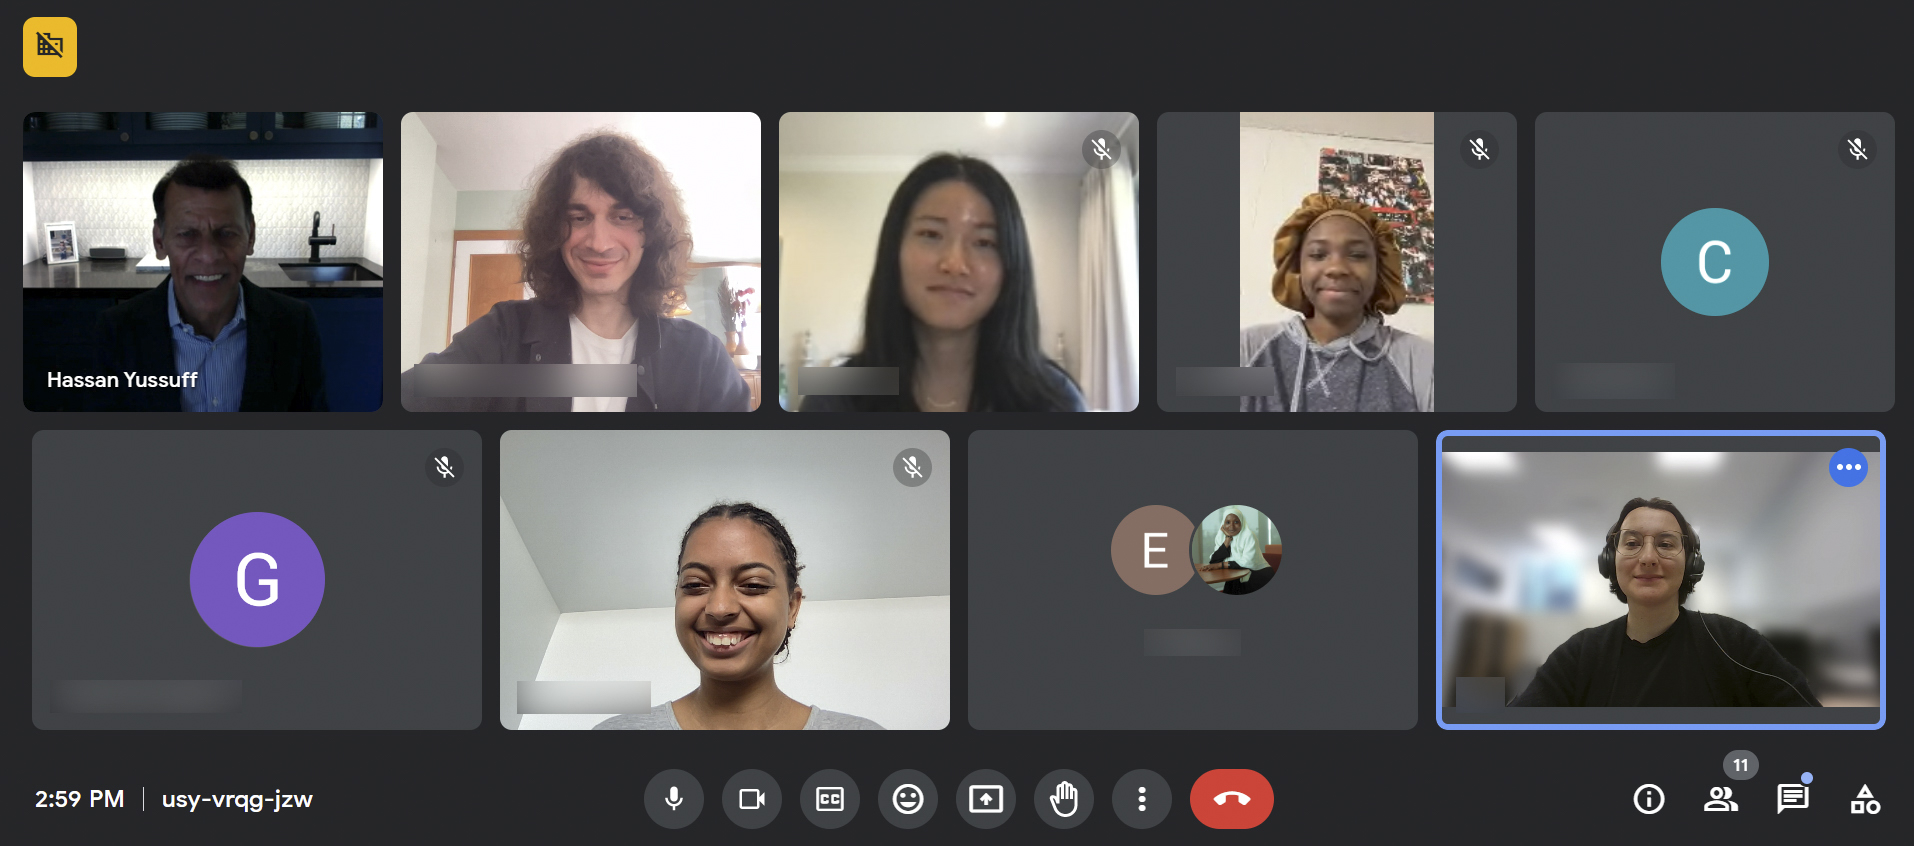 Thursday, May 25, 2023 – Senator Hassan Yussuff, top left, meets with international students from AIESEC. During this virtual meeting organized by SENgage, he touched on the role of the Senate in Parliament, what senators do, his path to the Senate and his own interests.